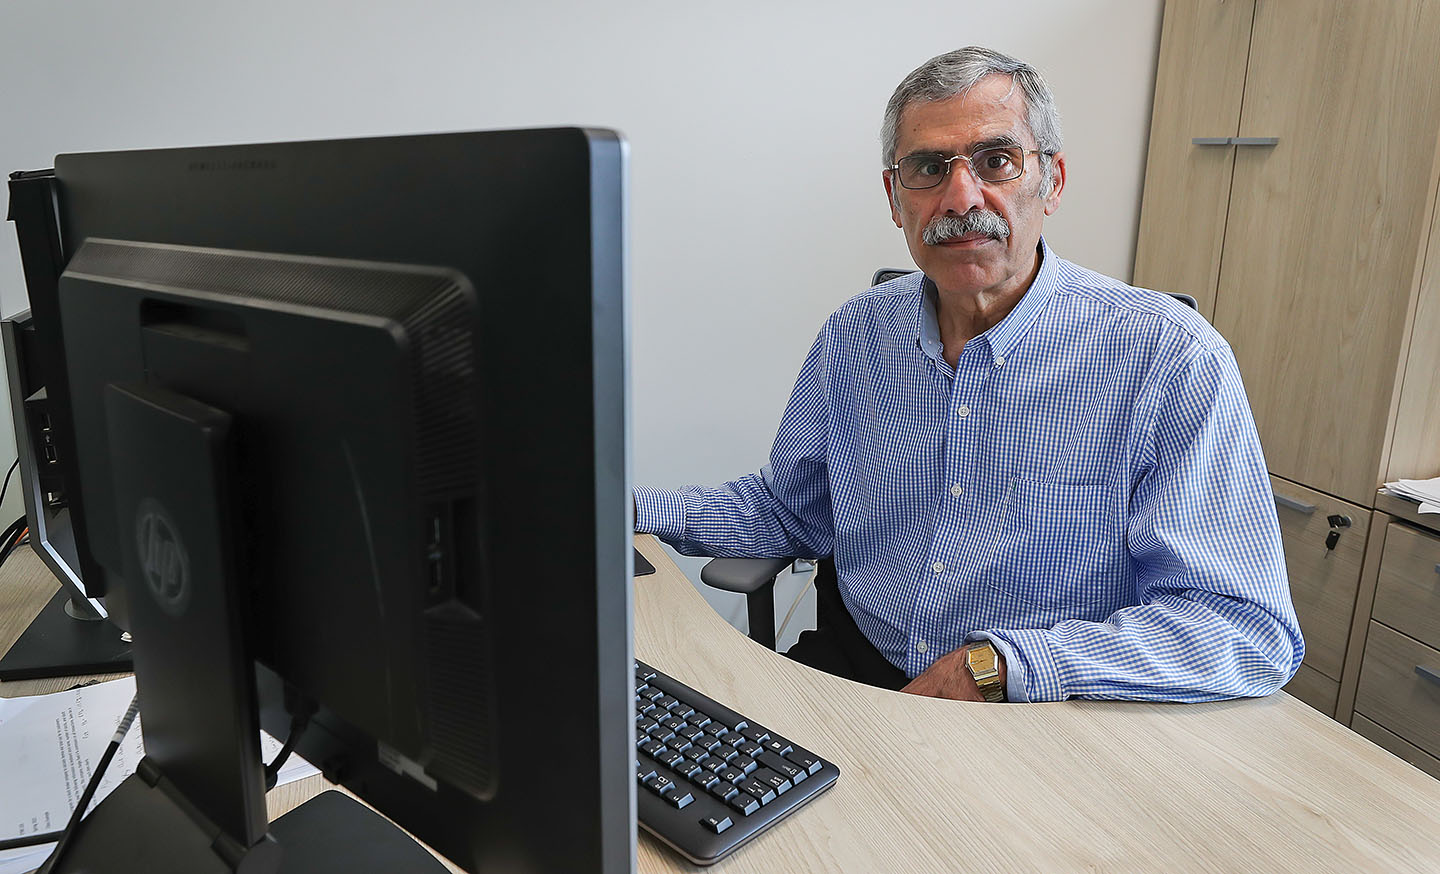 Shahram Alavi, an assistant professor in the department of cyber systems, is retiring after 38 years at UNK. (Photos by Erika Pritchard, UNK Communications)